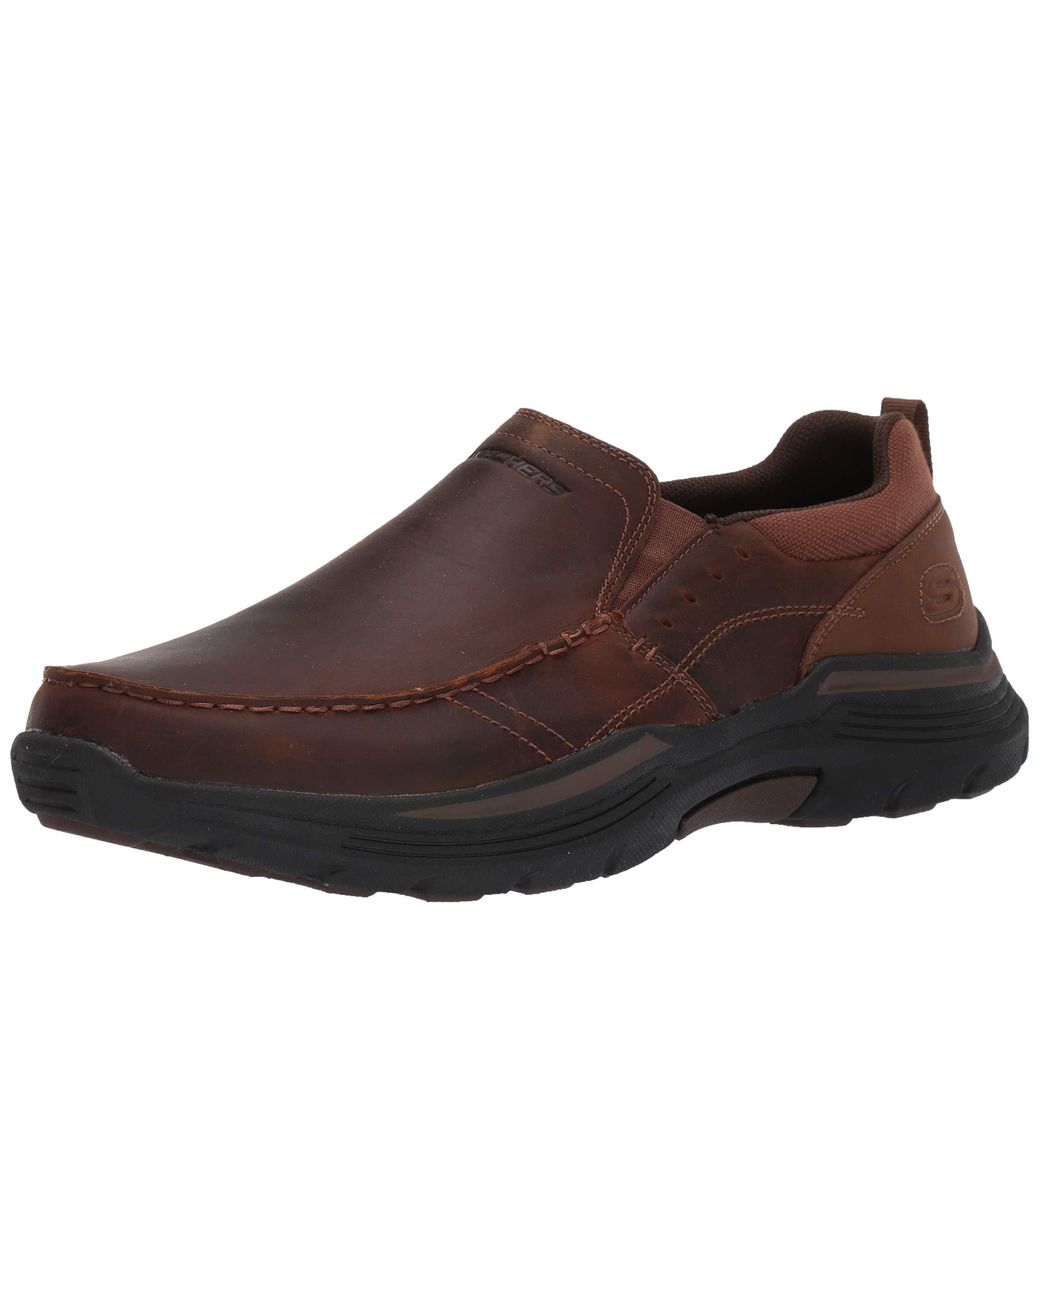 Skechers Expended-seveno Leather Slip On Moccasin in Brown for Men - Lyst